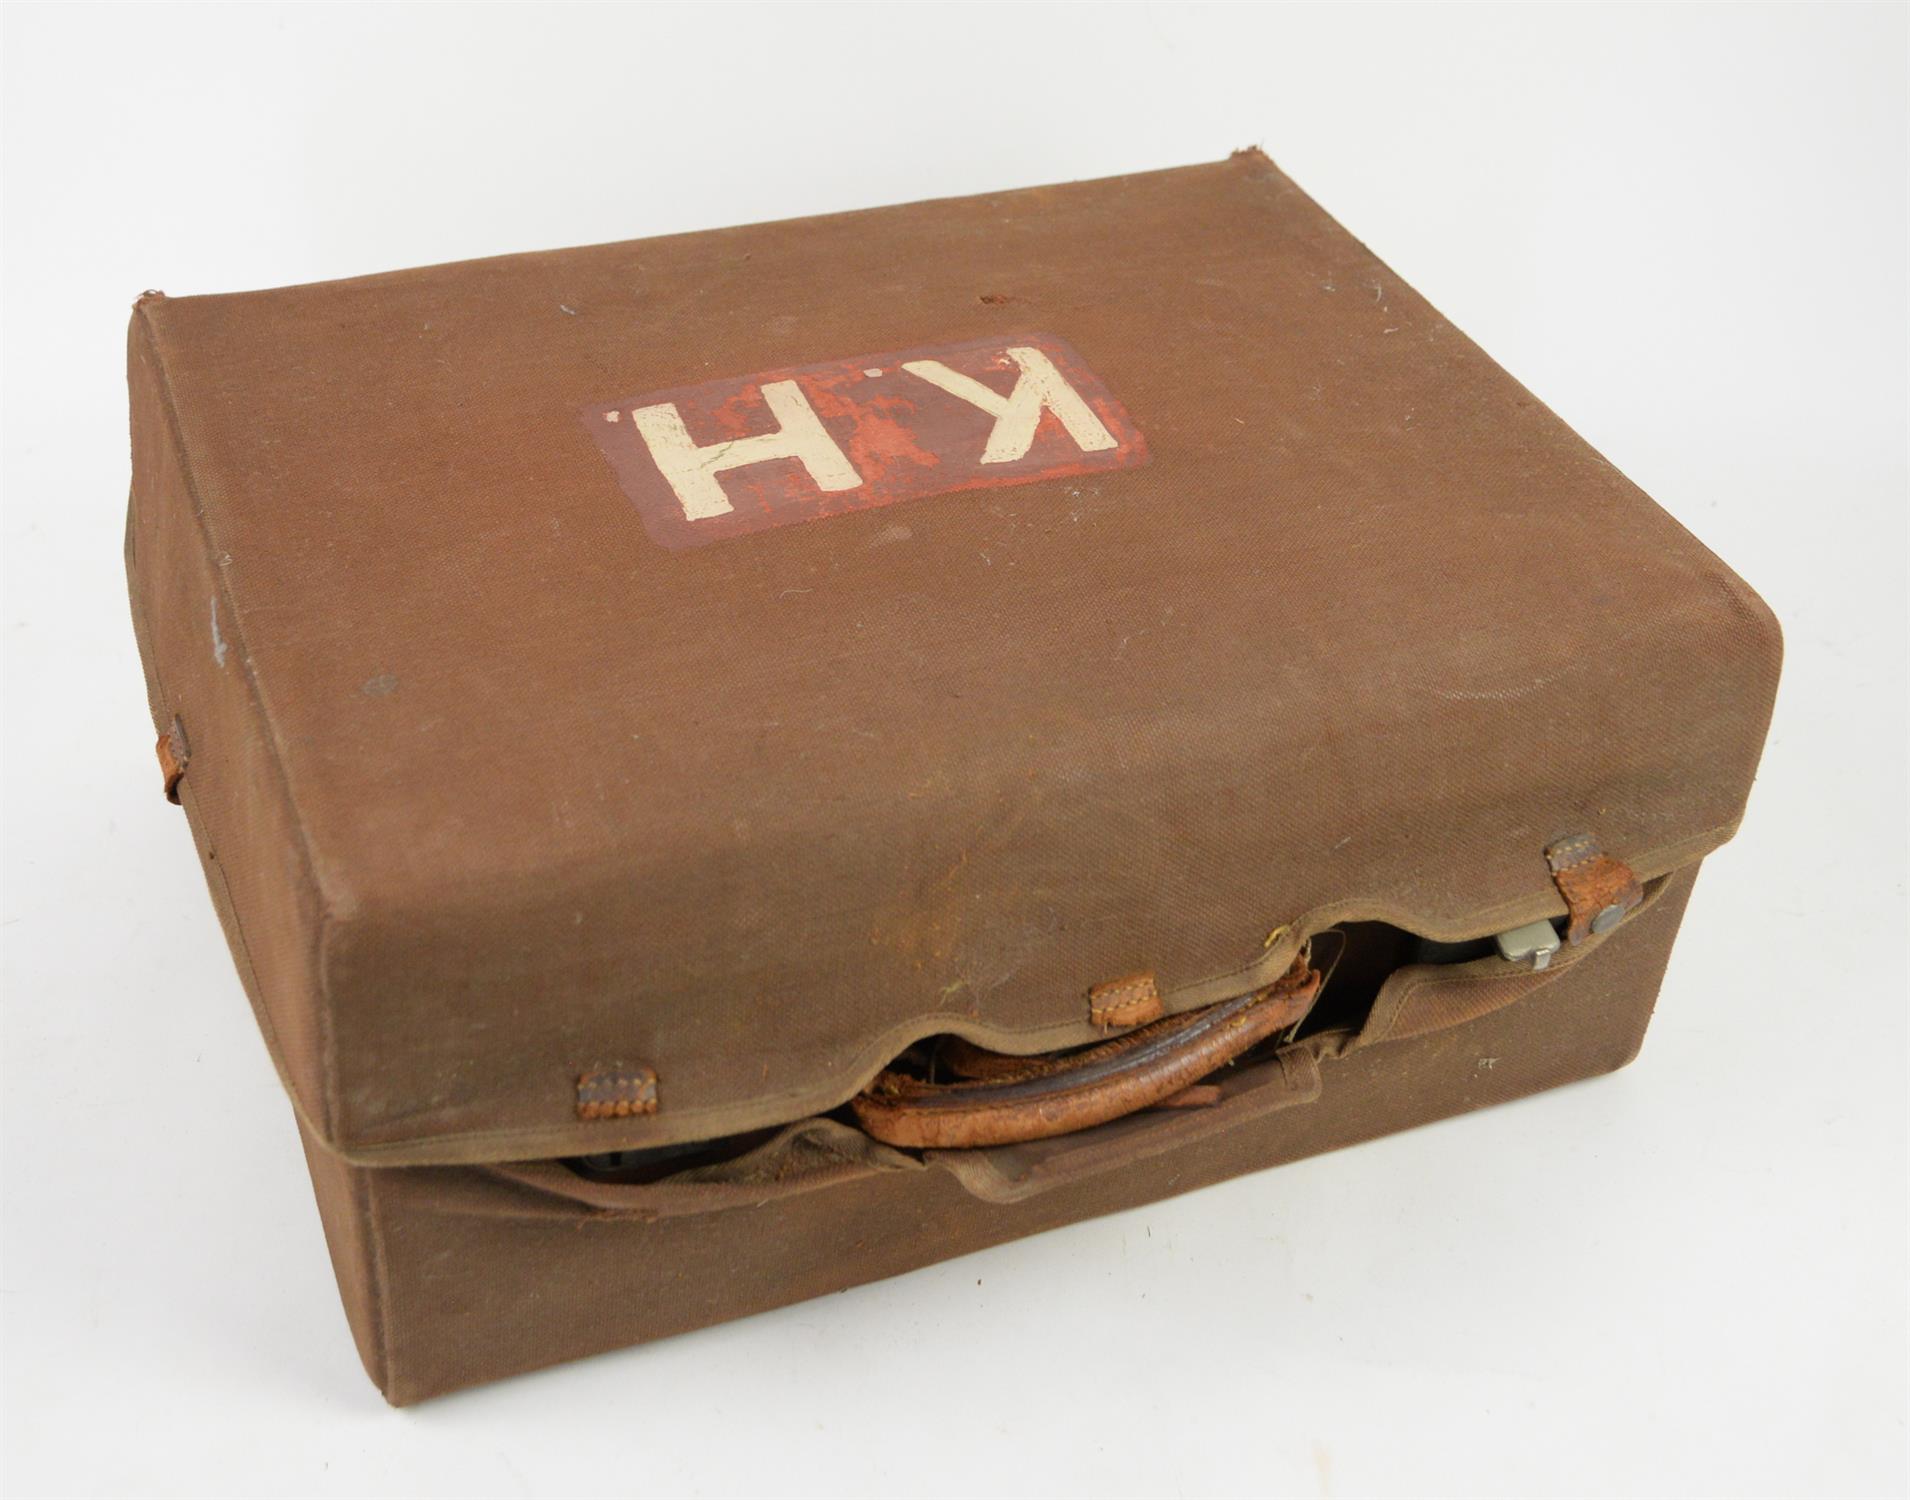 Early 20th century brown leather luggage vanity case with monogram E.H., marked for John Pound, - Image 3 of 3